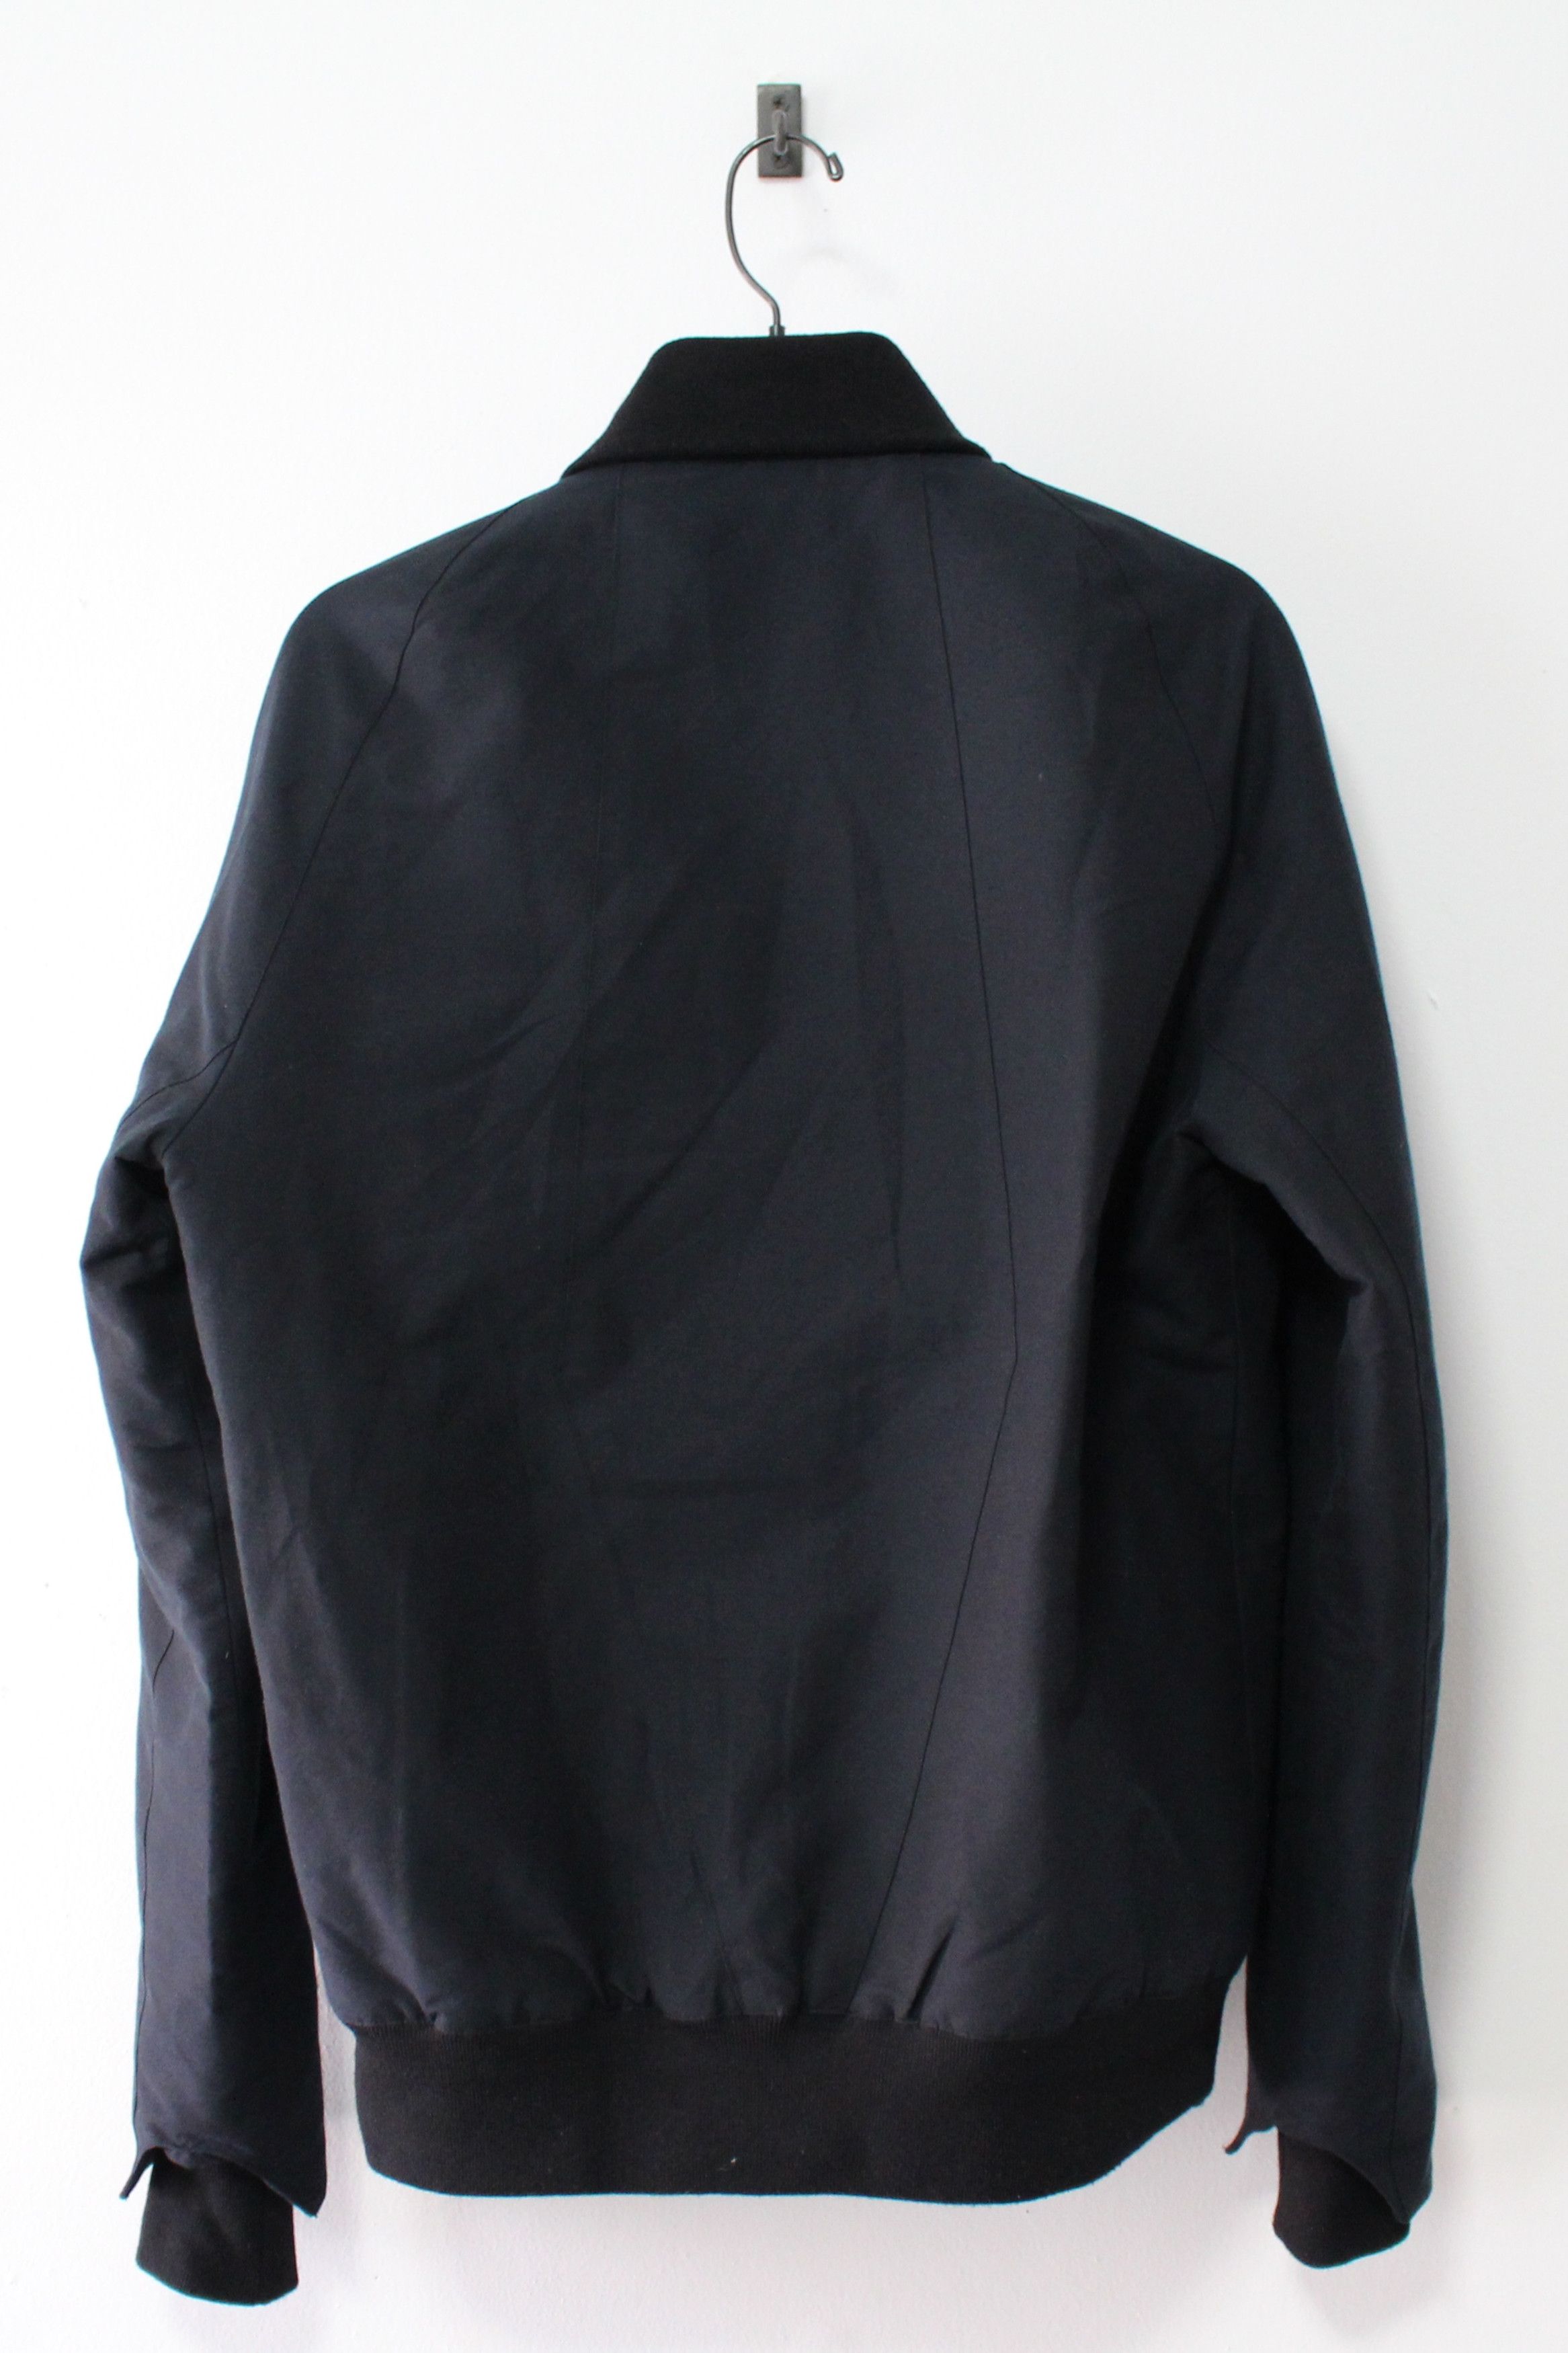 Siki Im SS13 Stealth MA-1 Silk Bomber Size US S / EU 44-46 / 1 - 2 Preview